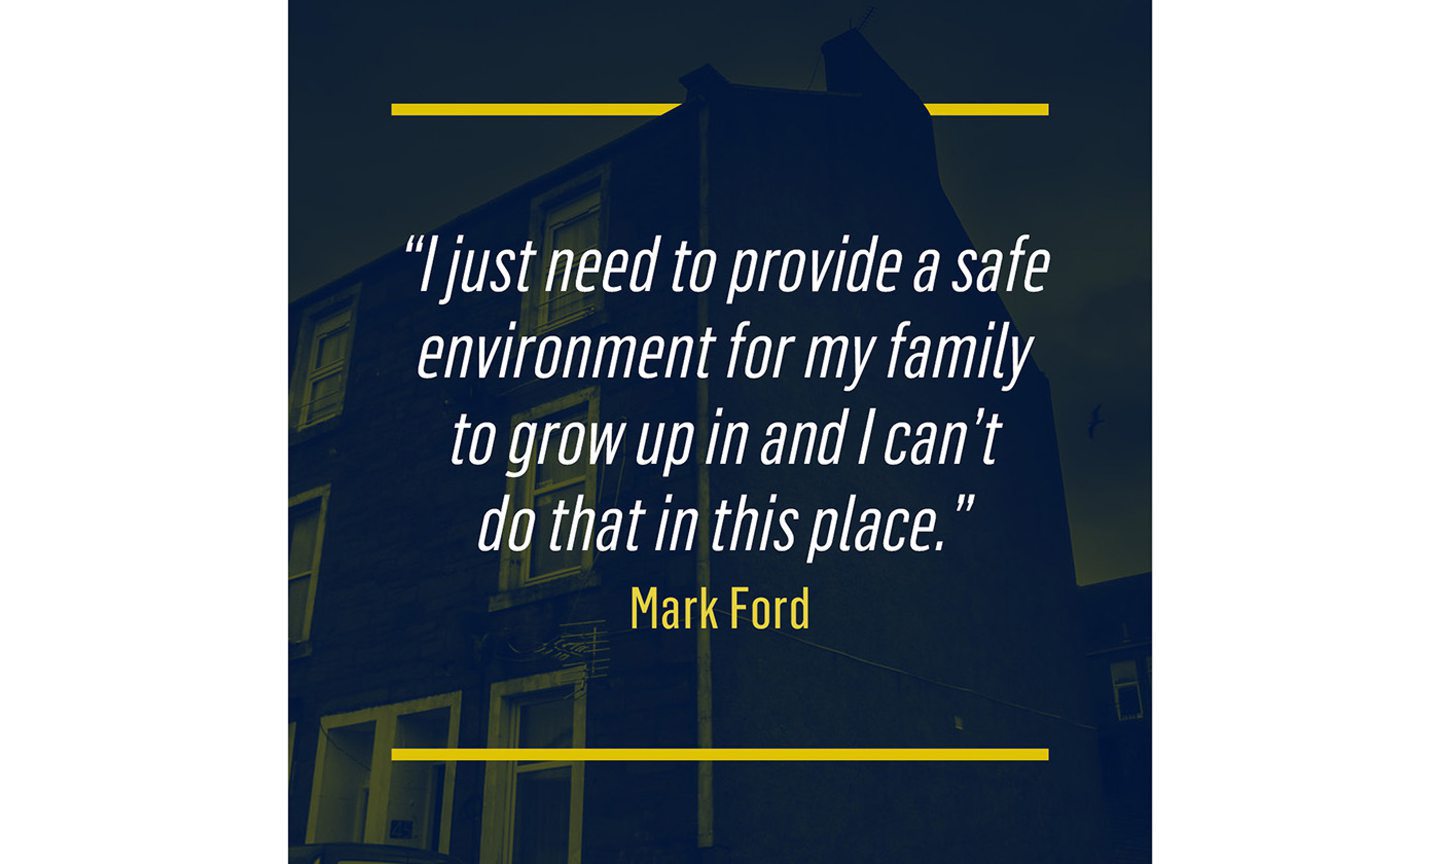 Quotation from Mark Ford: "I just need to provide a safe environment for my family to grow up in and I can't do that in this place."